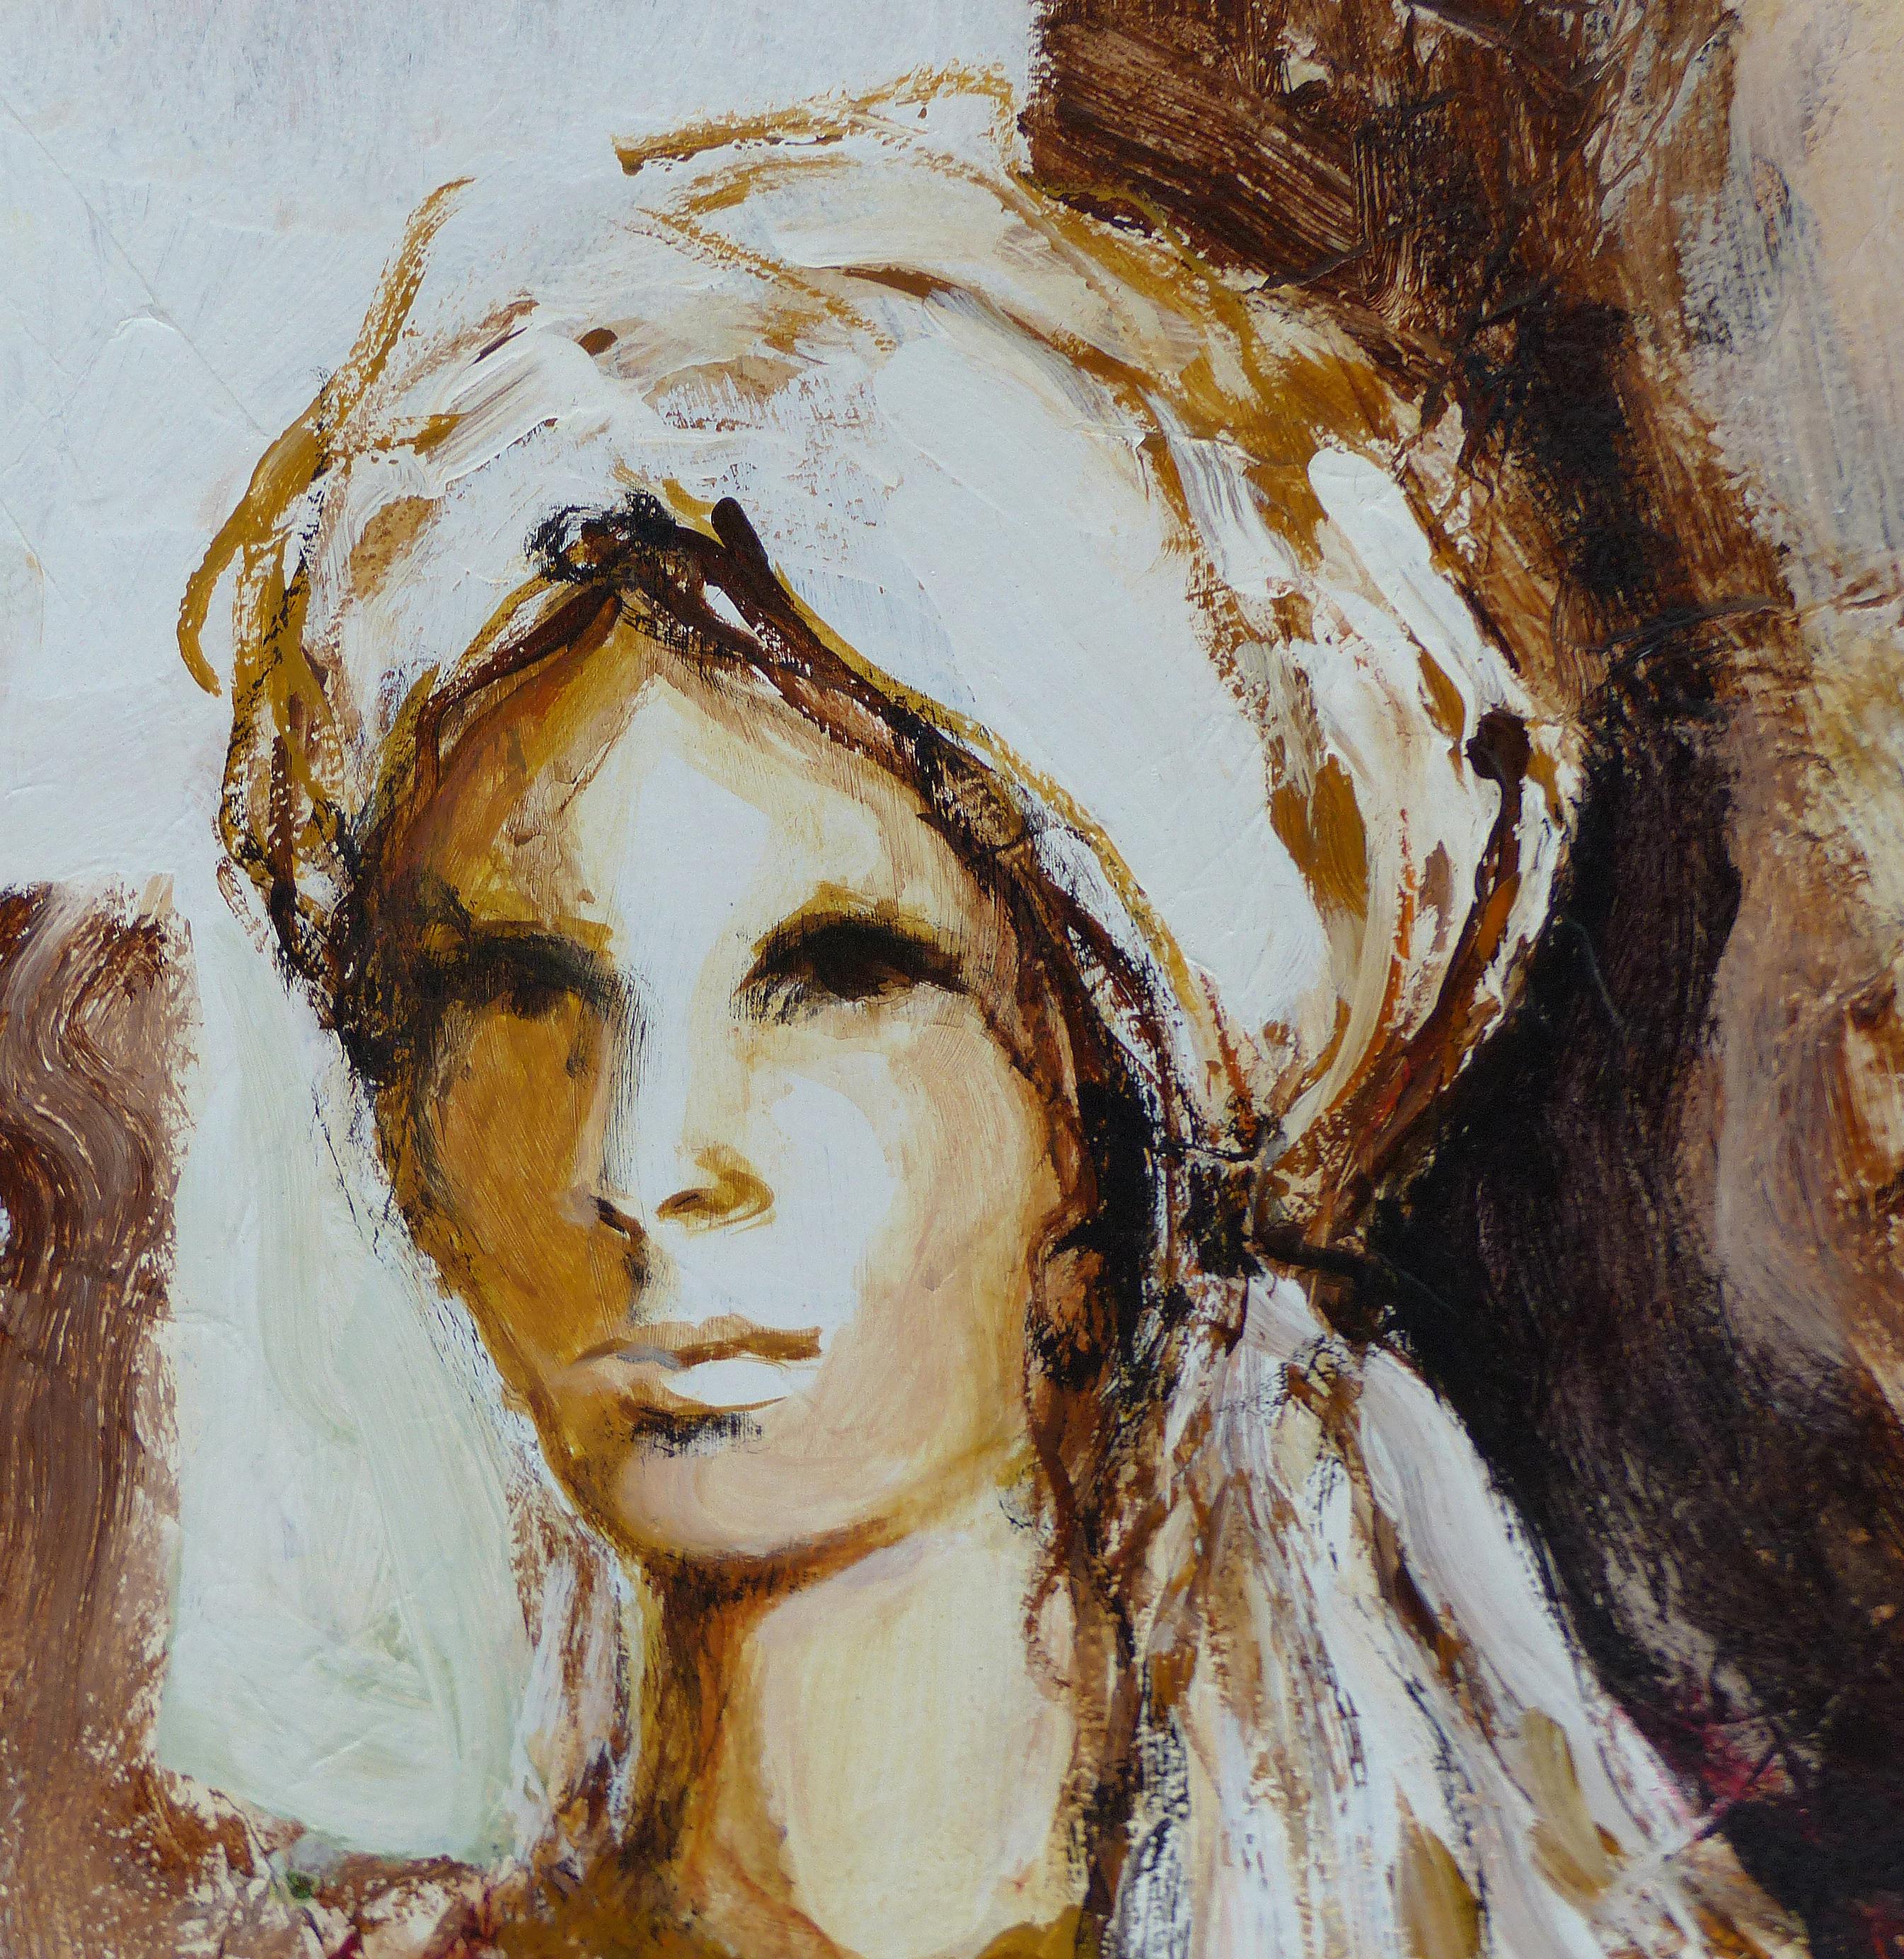 Oil on Panel Board of a Seated Woman with Head Scarf, Unsigned, circa 1965

Offered for sale is a large oil on panel board depicting a seated woman with a head scarf. Unsigned, framed with a wood and metal frame. Wired and ready to hang.